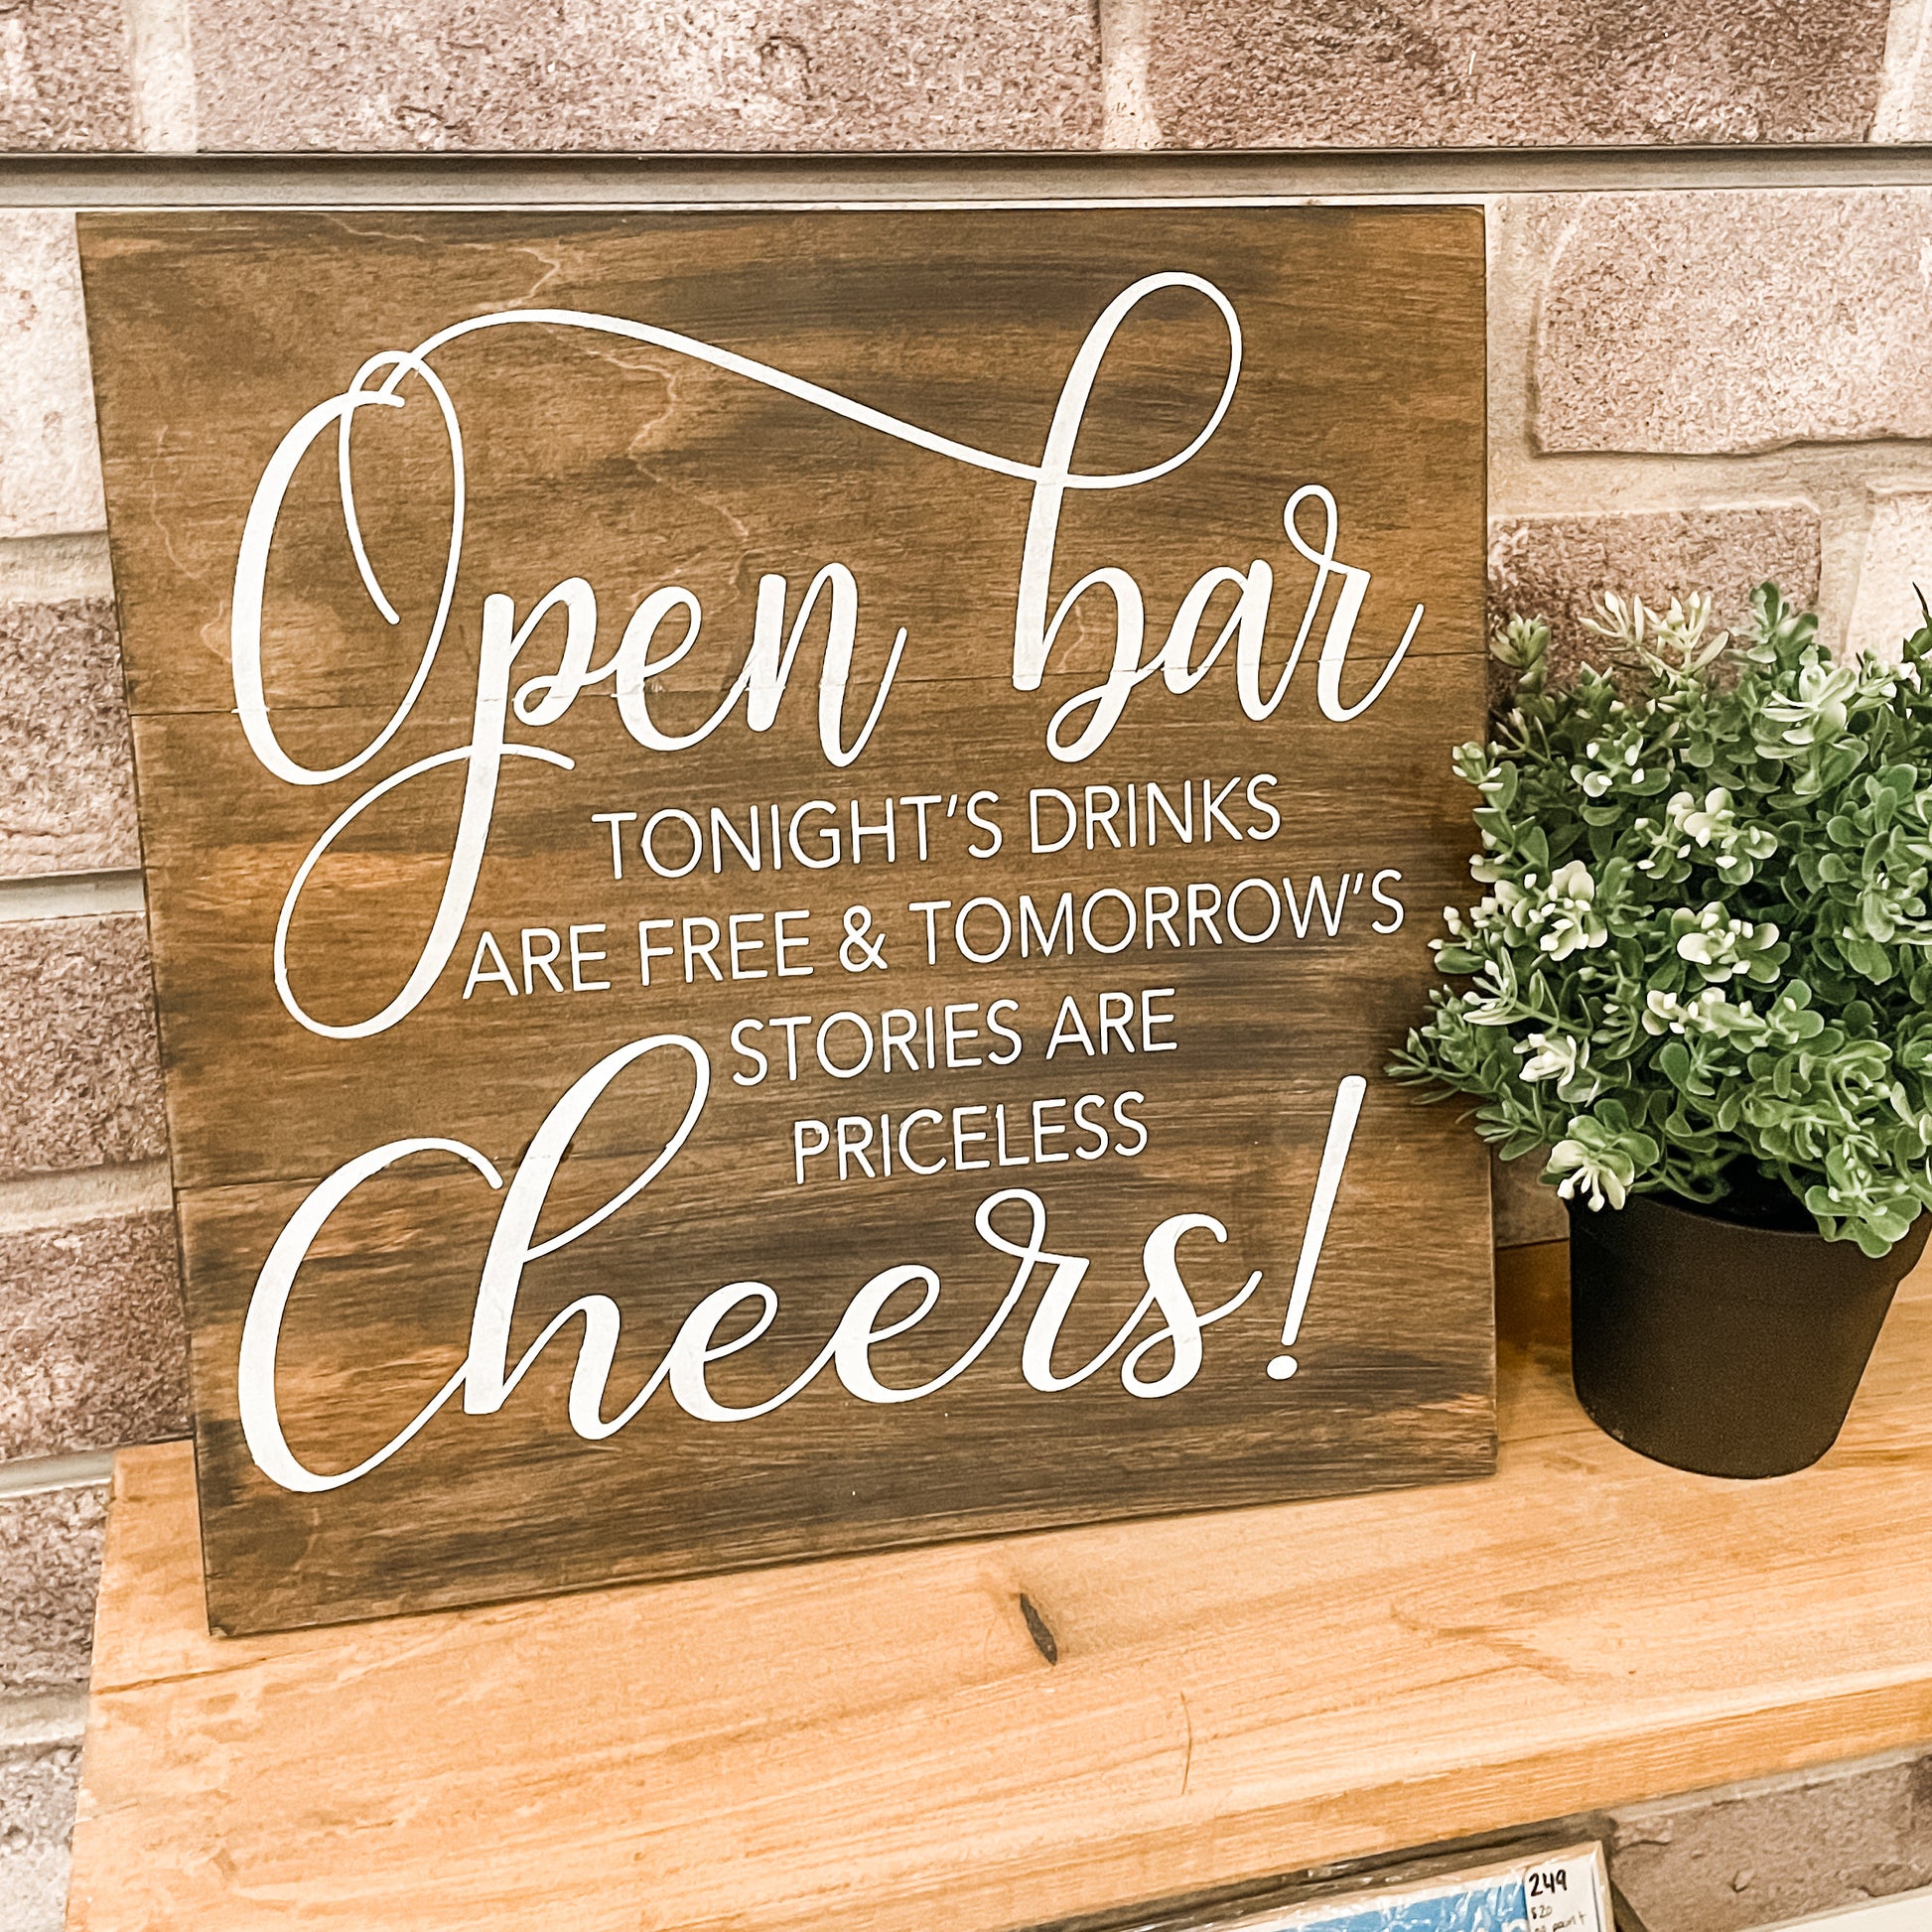 Open Bar Tonight's Drinks are Free...: SQUARE DESIGN - Paisley Grace Makery